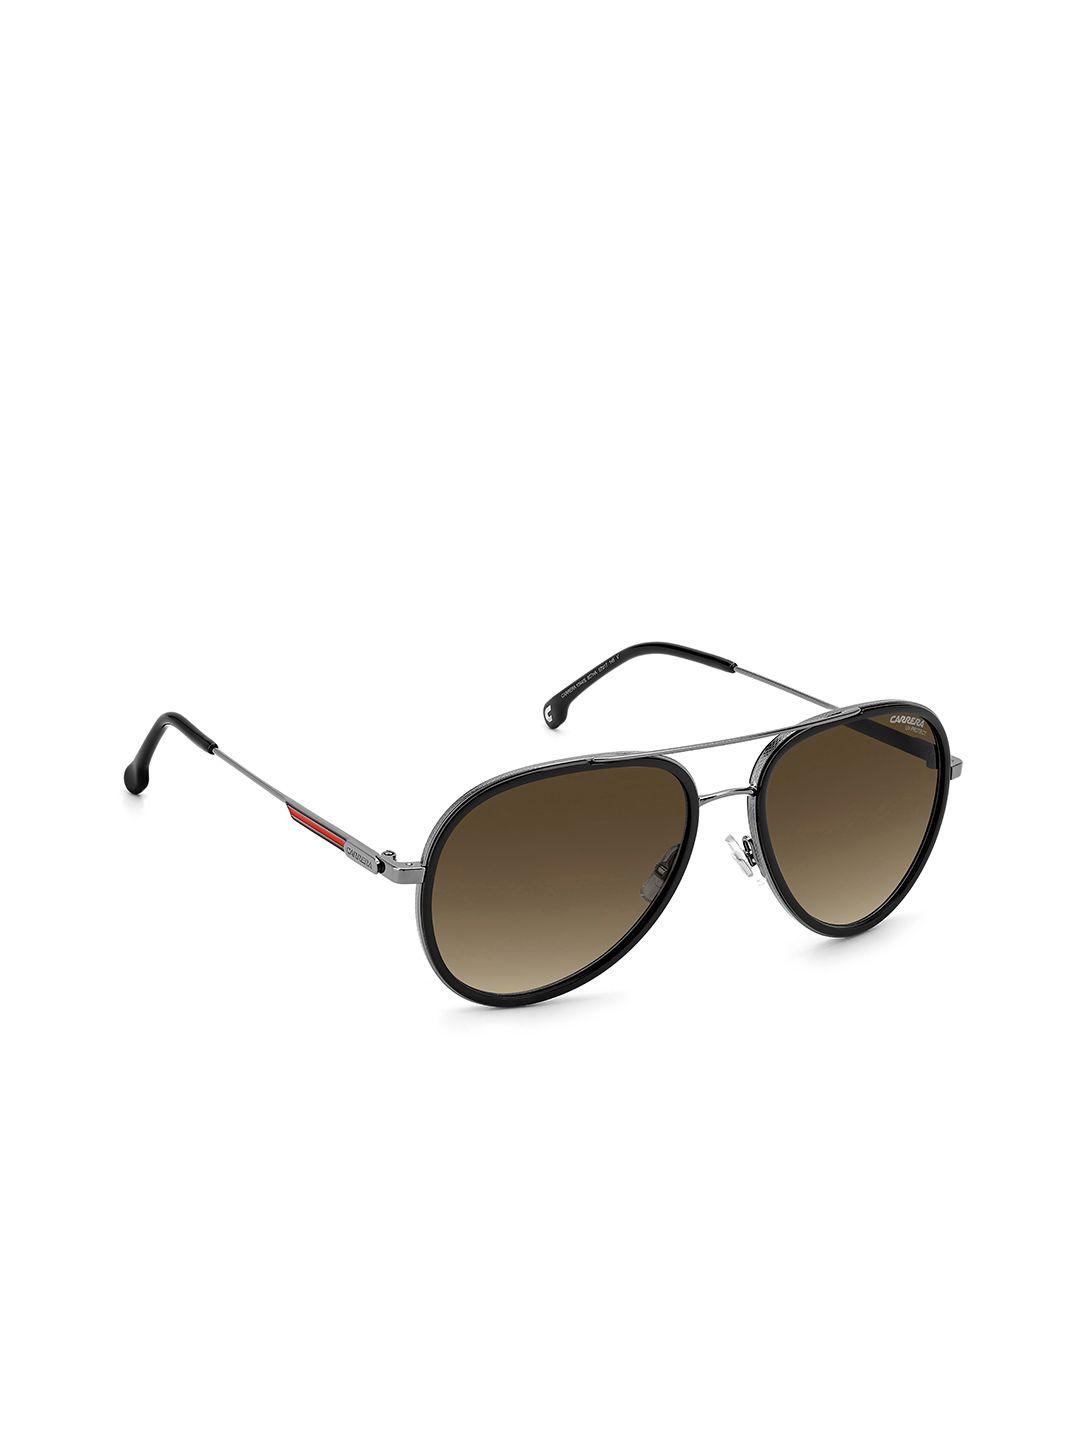 carrera unisex brown lens & black round sunglasses with uv protected lens